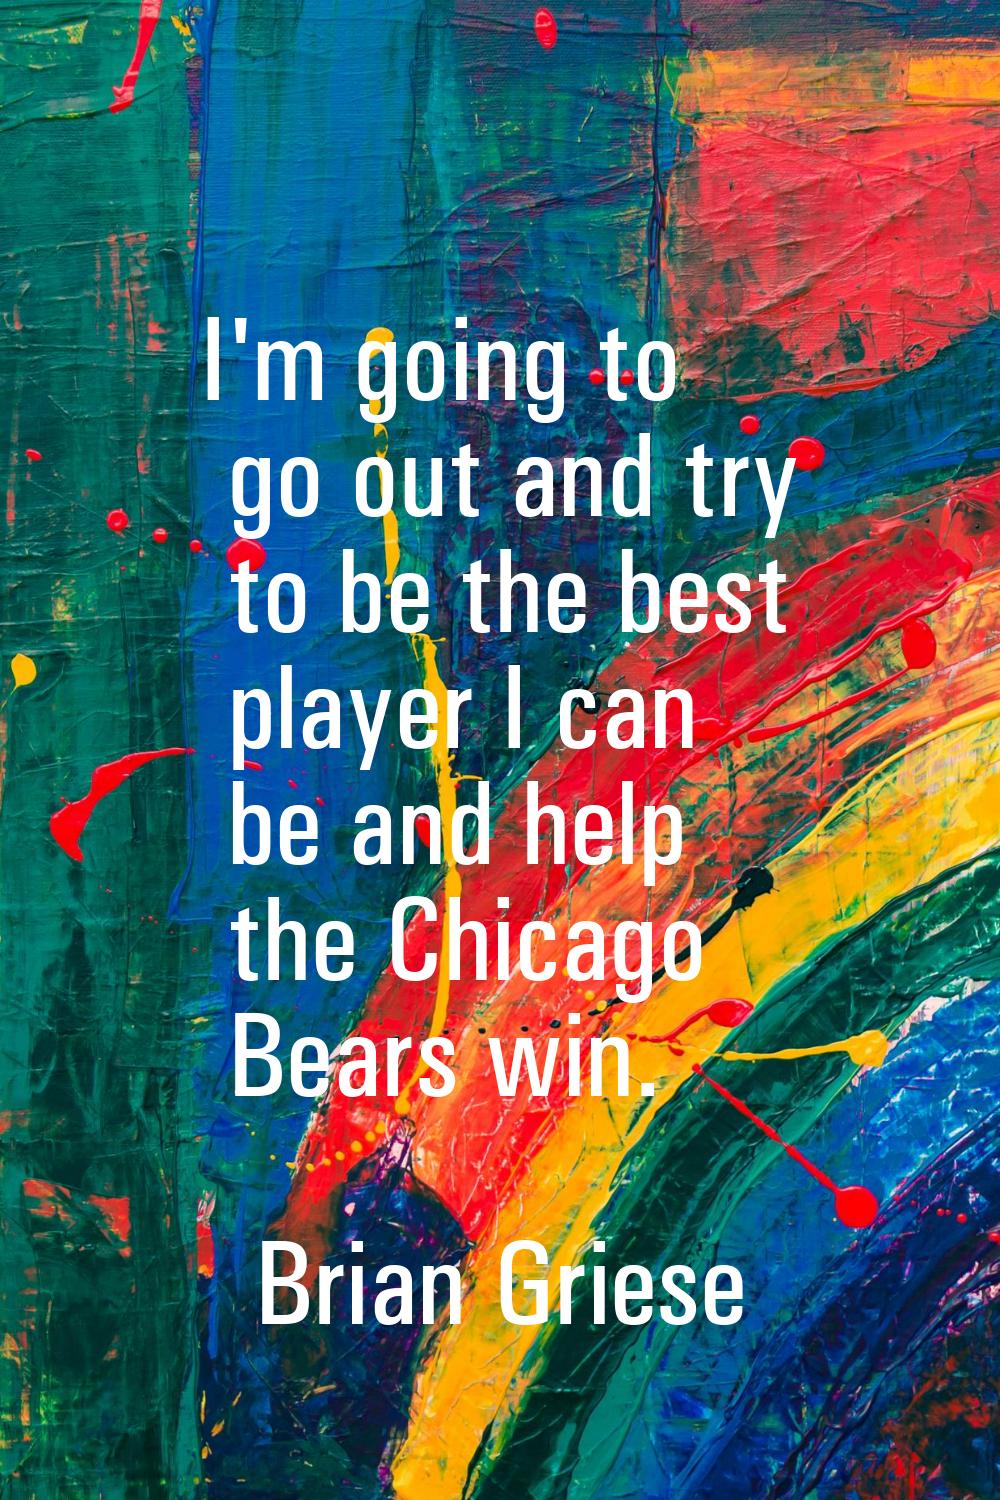 I'm going to go out and try to be the best player I can be and help the Chicago Bears win.